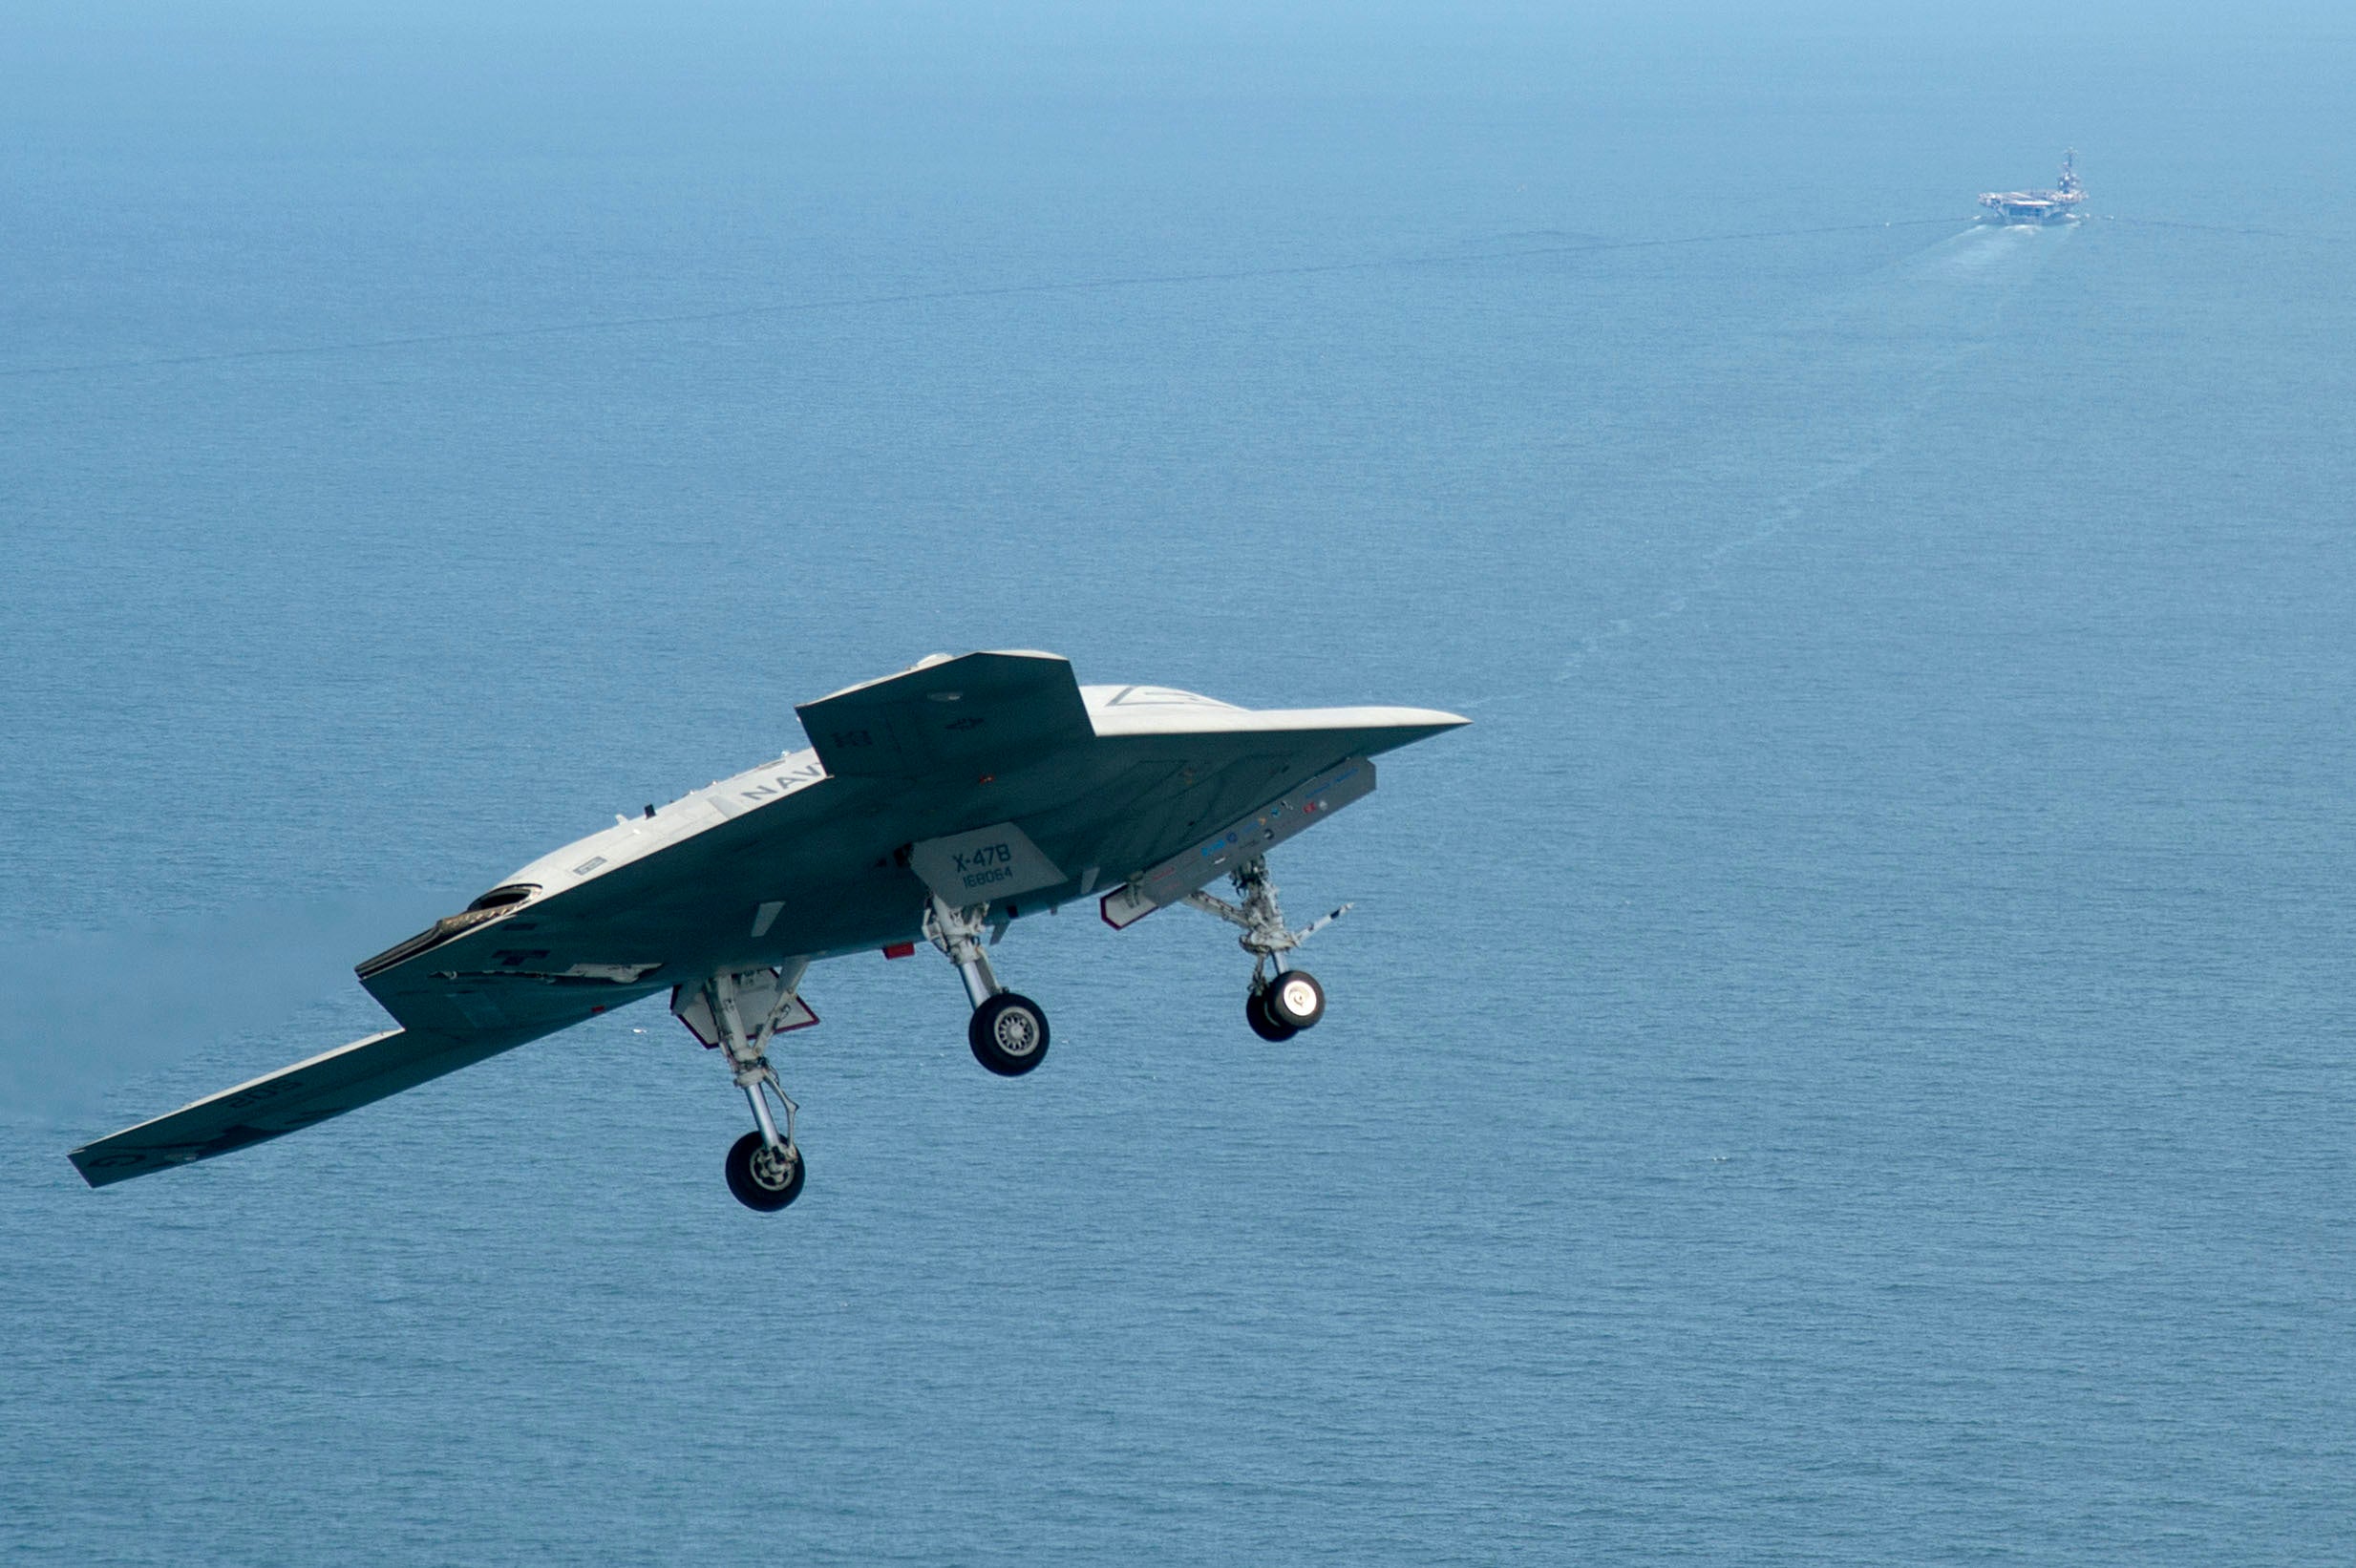 An X-47B Unmanned Combat Air System demonstrator flies near the aircraft carrier USS George H.W. Bush (CVN 77). George H.W. Bush is the first aircraft carrier to successfully catapult launch an unmanned aircraft from its flight deck. (U.S. Navy photo by Erik Hildebrandt/Released)